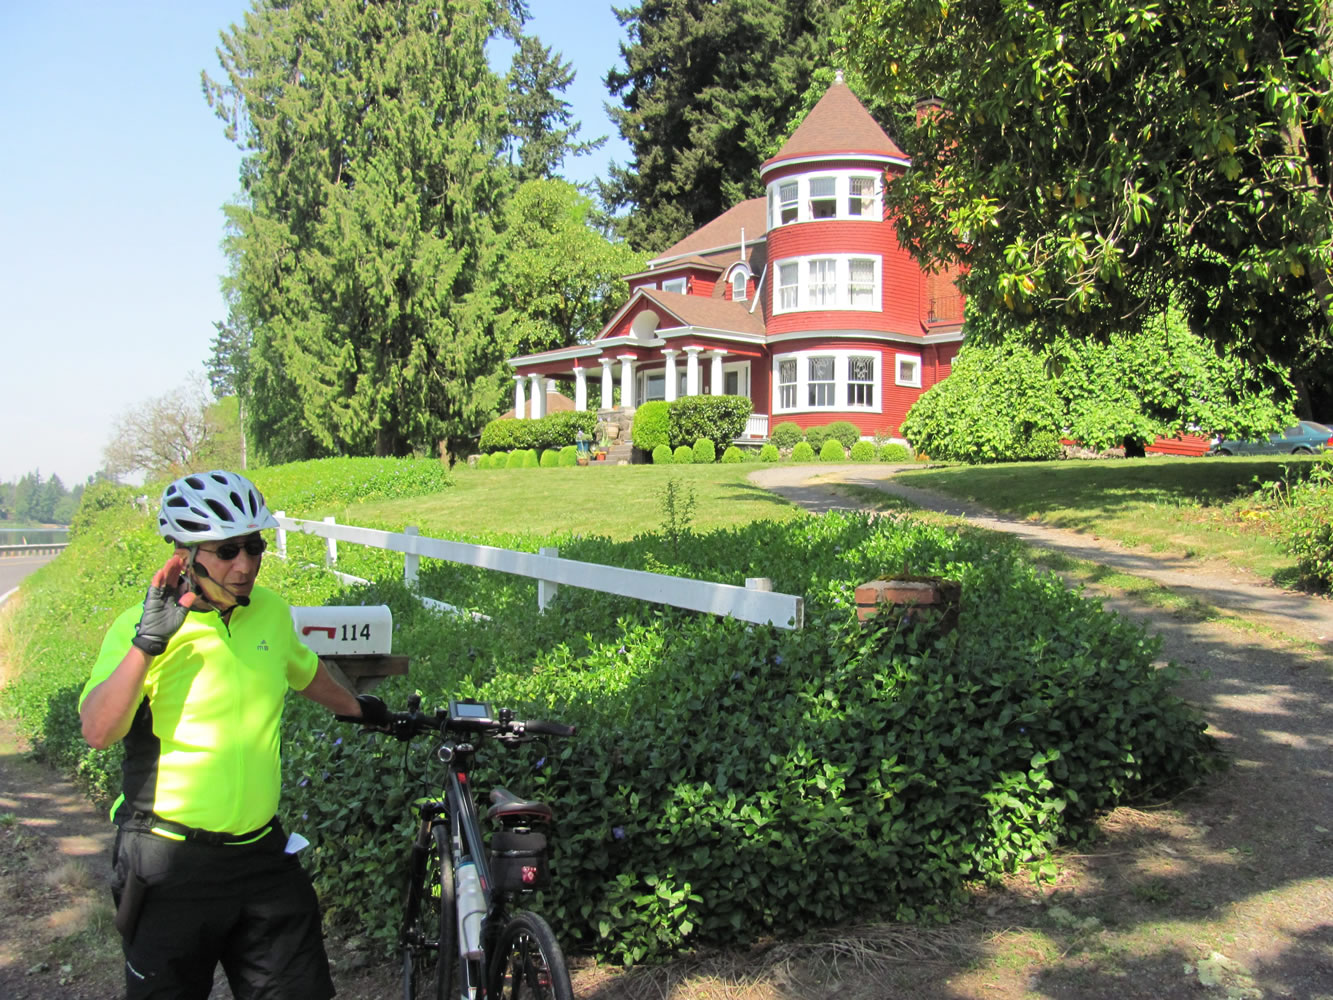 Joseph Blanco talks about some of the interesting features and historical aspects of the Pittock-Leadbetter House at Lacamas Lake.